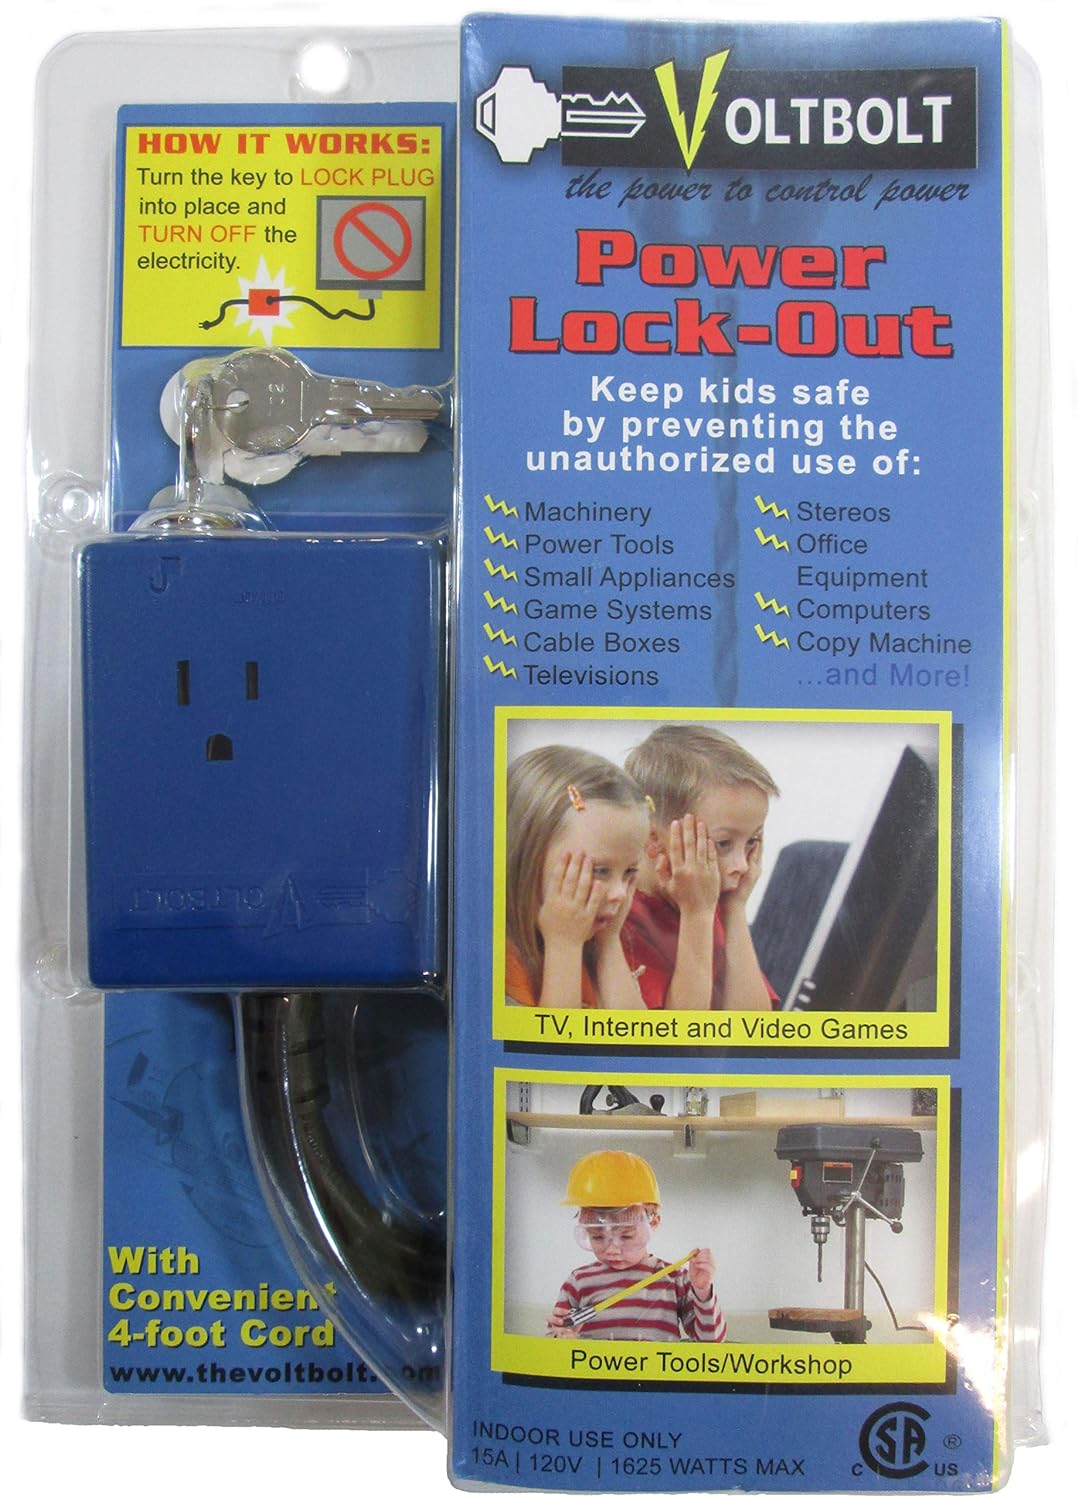 Generic VoltBolt Power Plug Lock-Out - The Power to Control Power - Keyed Alike